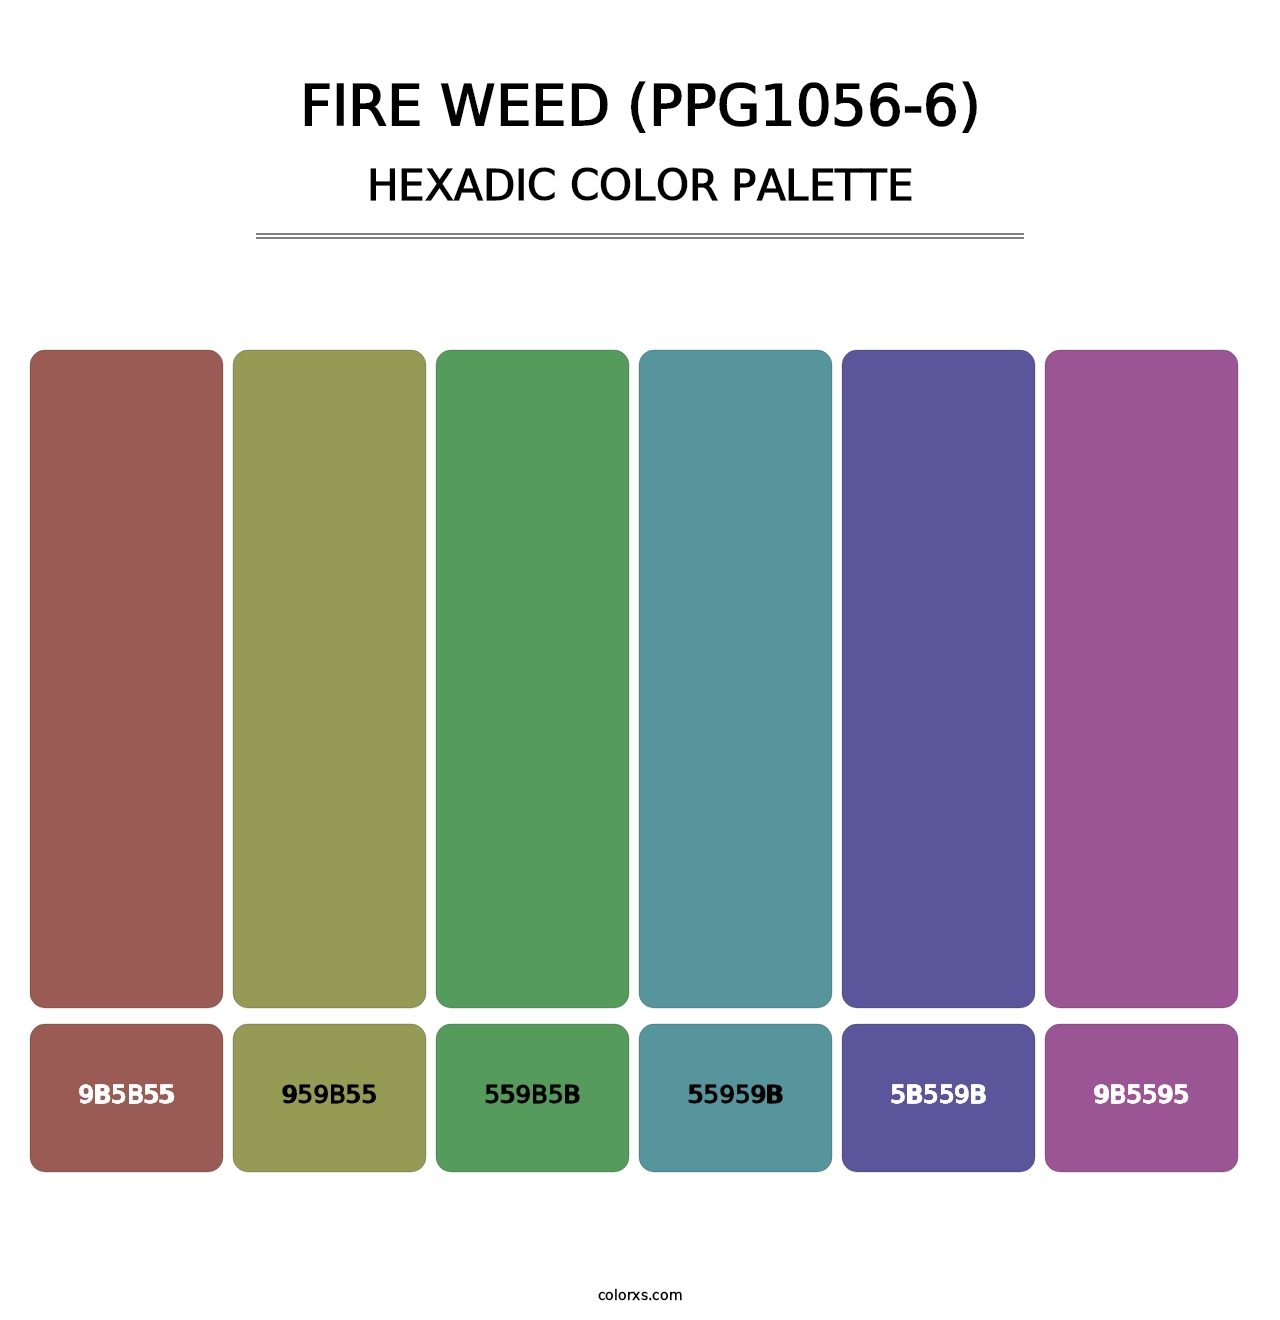 Fire Weed (PPG1056-6) - Hexadic Color Palette